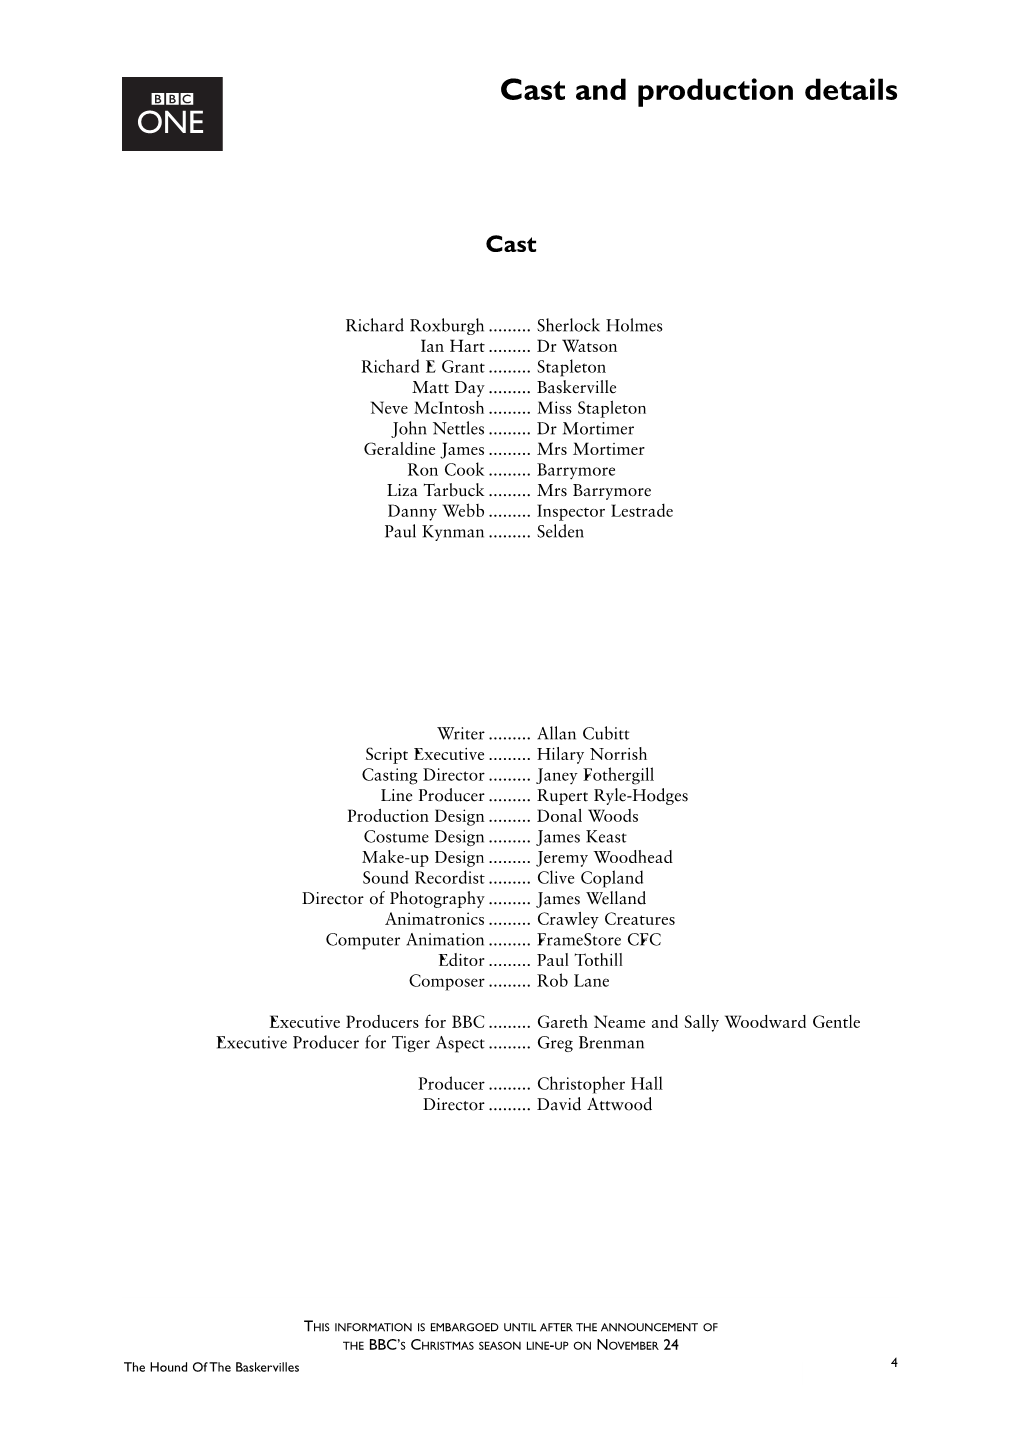 Cast and Production Details & Introduction